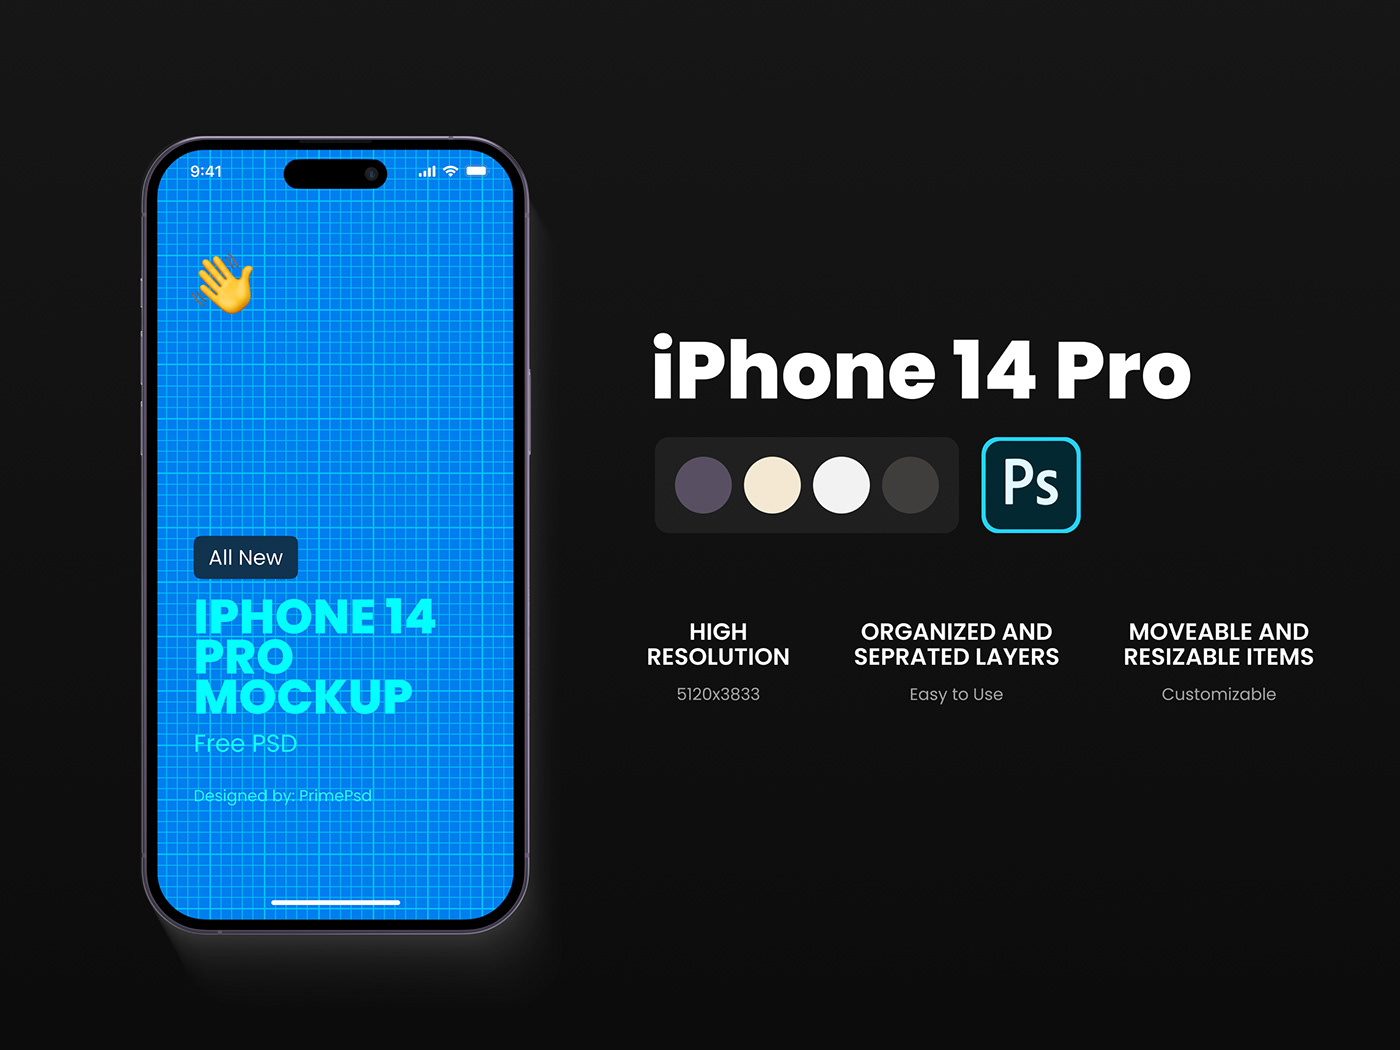 iphone 14 iphone 14 font view iphone 14 mockup iphone 14 mockup psd iphone 14 pro iphone 14 pro mockup iphone 14 psd primepsd